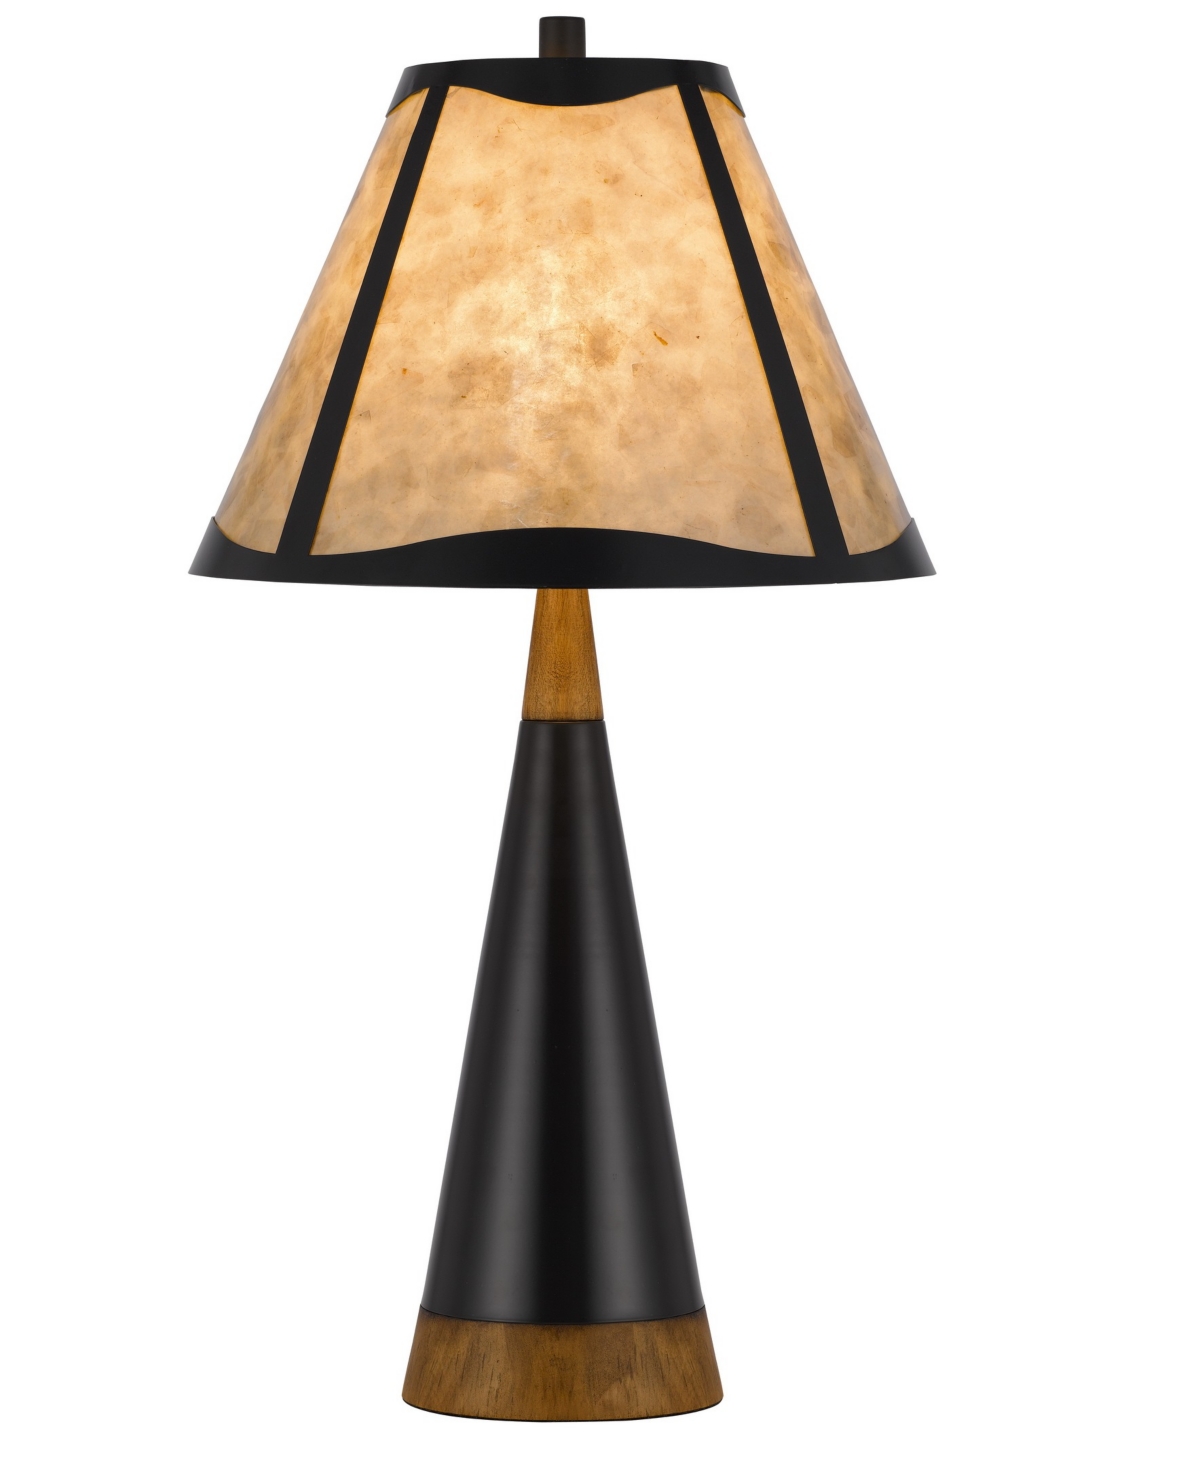 Cal Lighting 29.5" Height Metal And Wood Table Lamp With Shade In Mica,black,wood